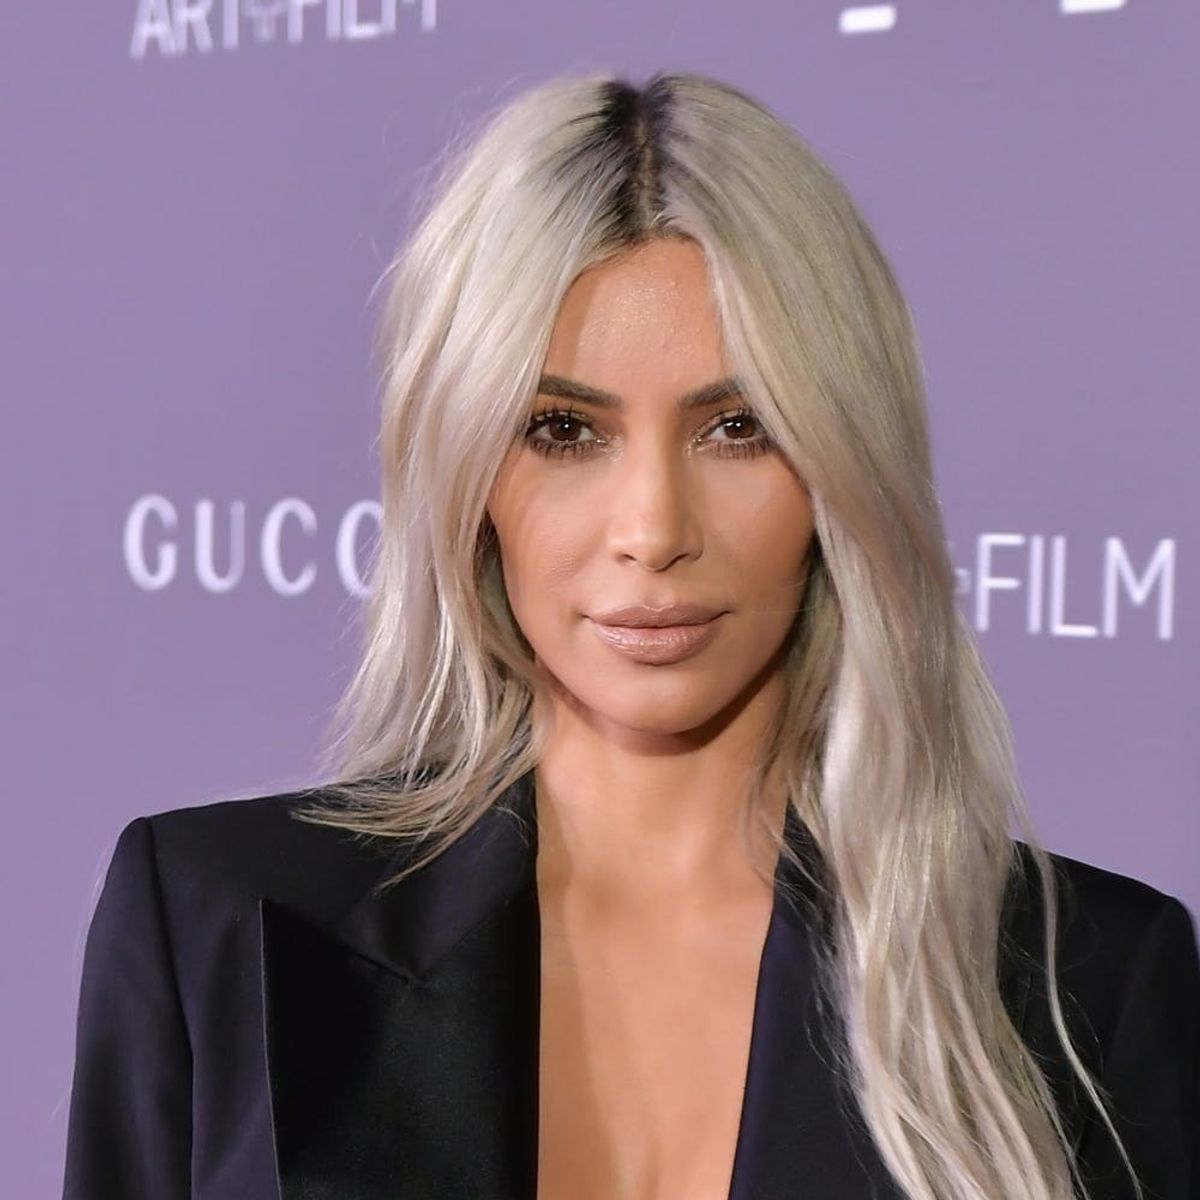 You Won’t Believe How Much Money Kim Kardashian West’s Perfume Earned in a Single Day 